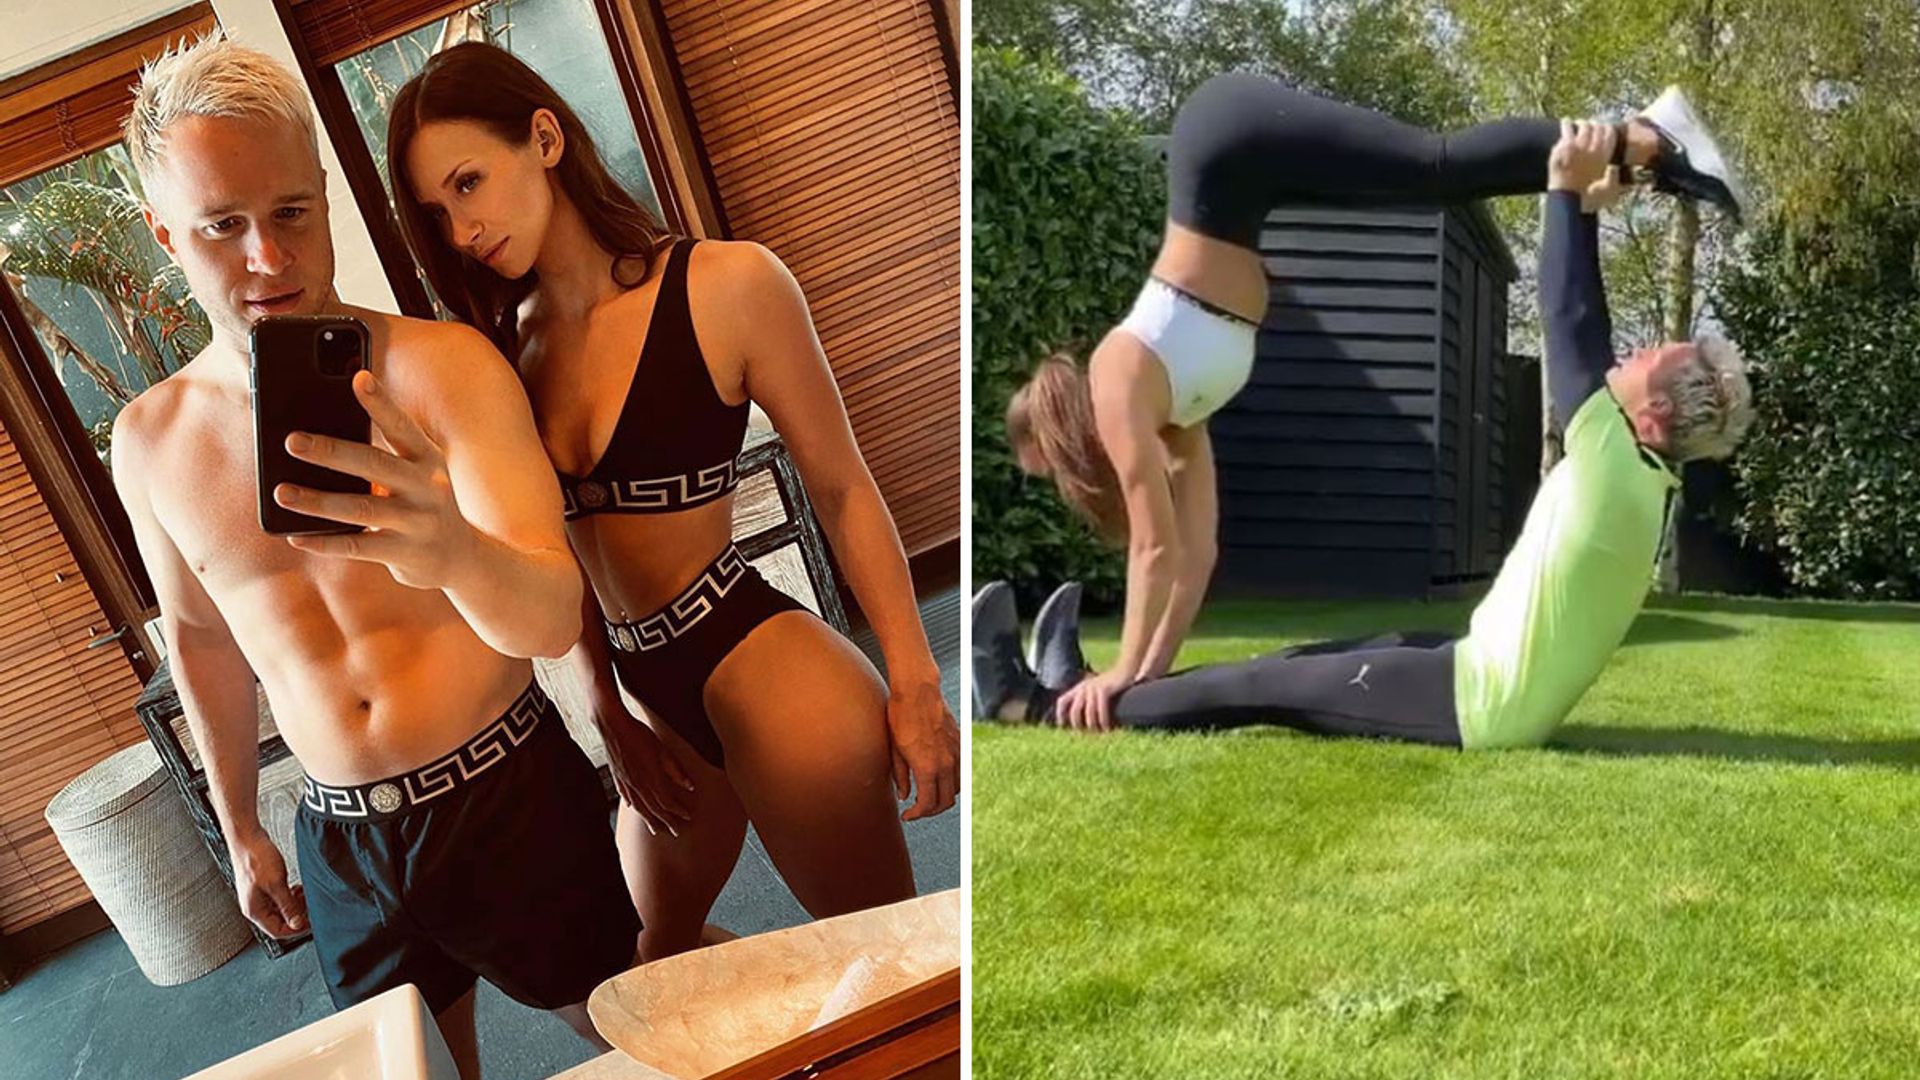 Olly Murs and girlfriend Amelia wow fans with intense acrobatic workout